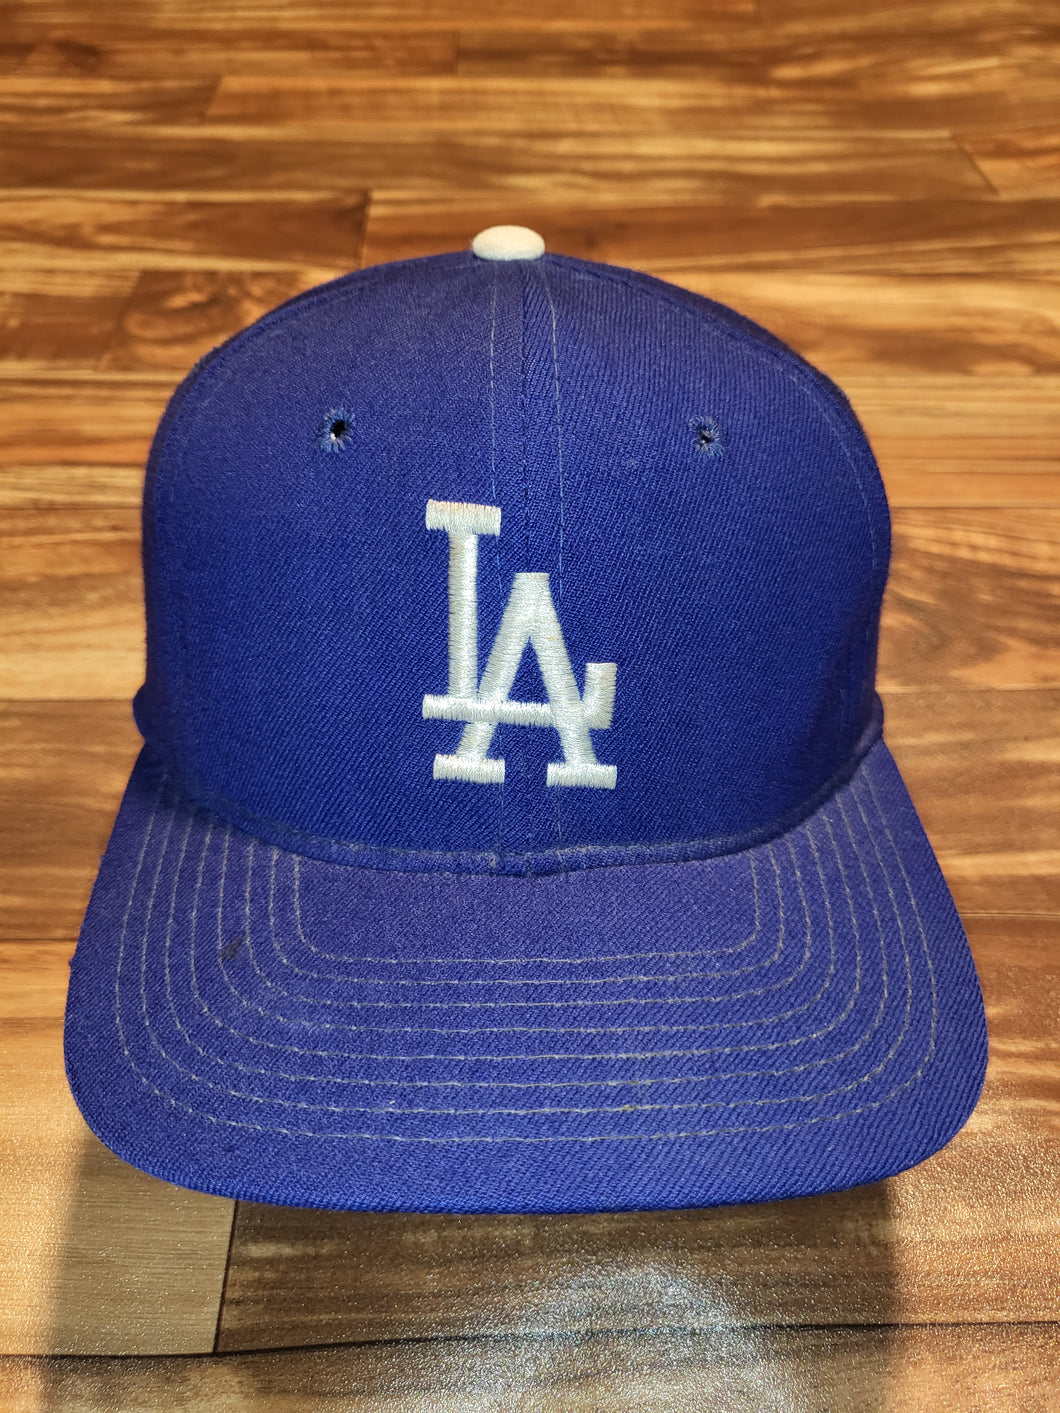 Vintage Rare Los Angeles Dodgers Sports Specialties Fitted Plain